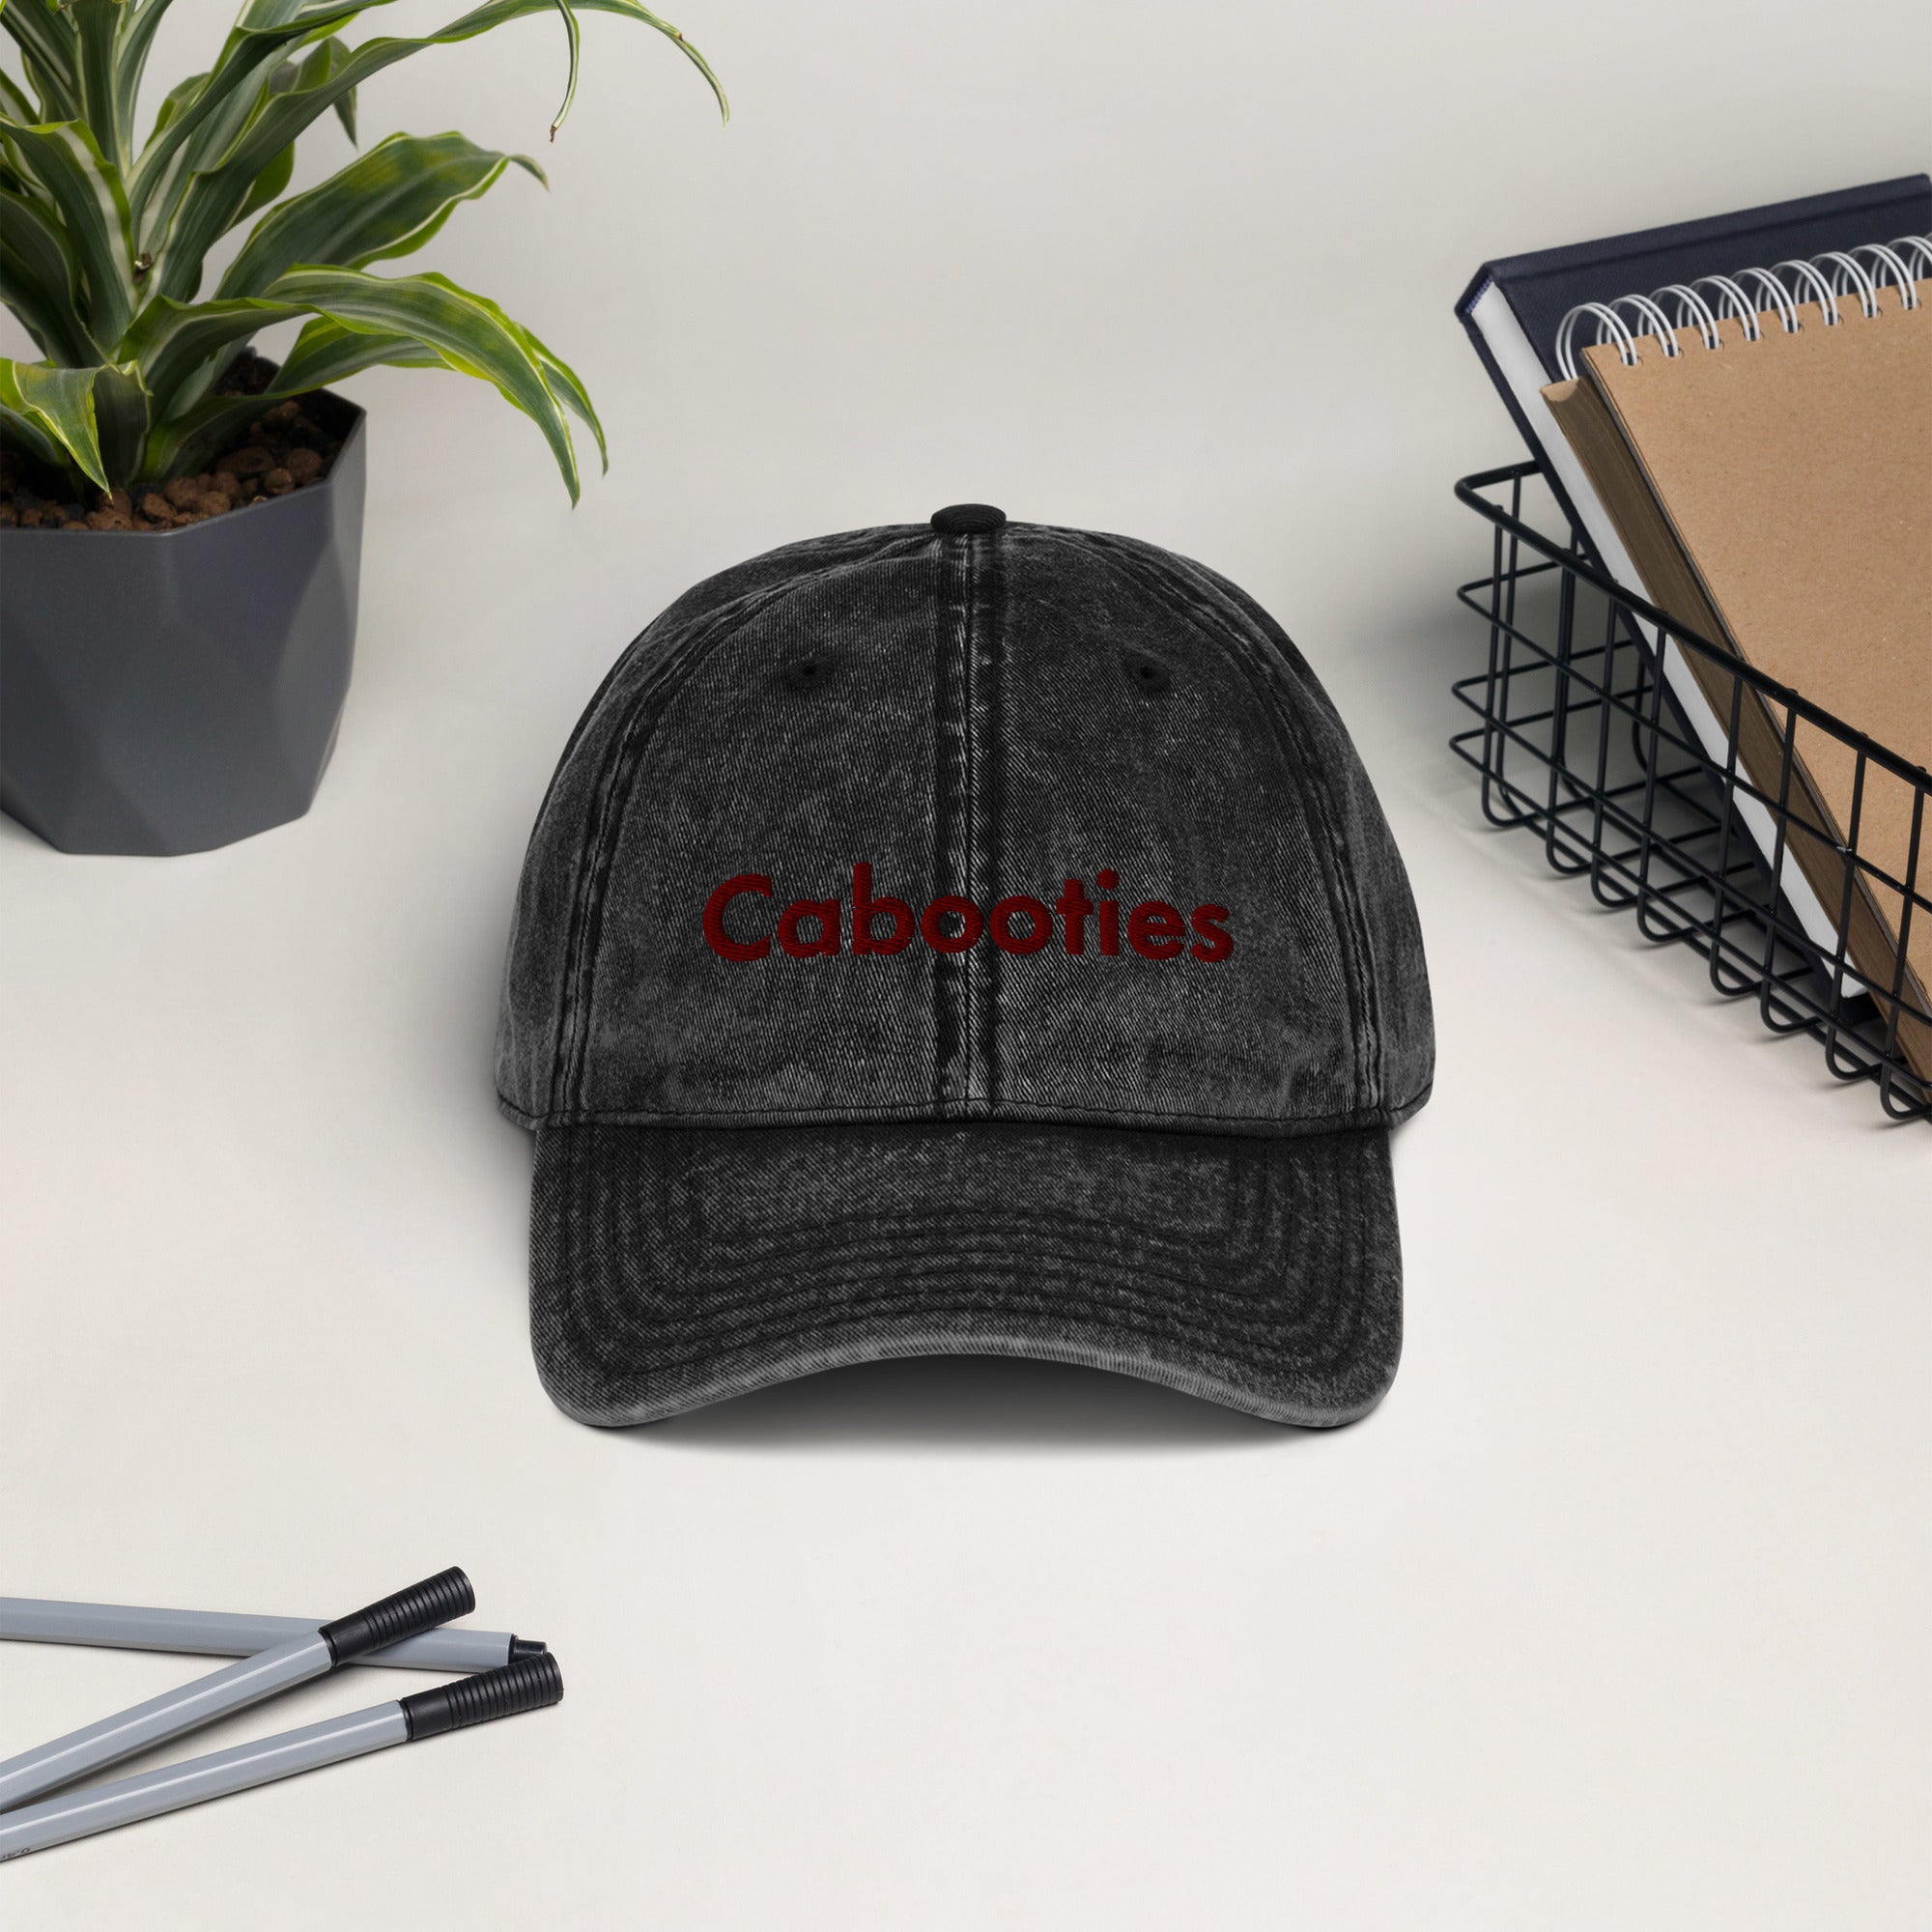 Cabooties Vintage Cotton Twill Cap for Adults